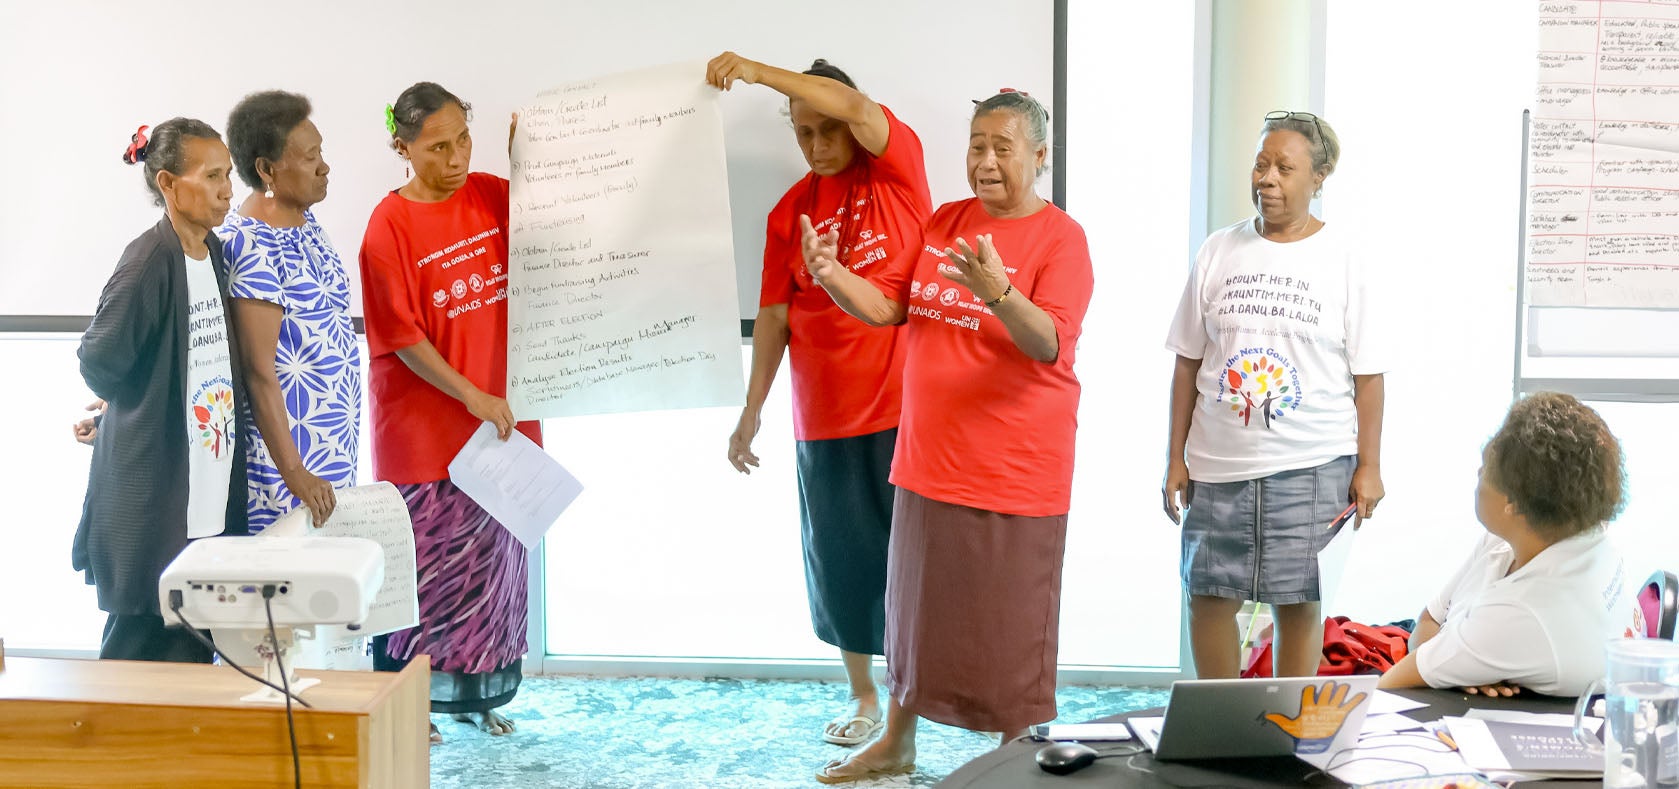 UN Women ´s training on women’s political leadership and campaign strategies in Port Moresby, Papua New Guinea. Photo: UN Women/Reuben Tabel